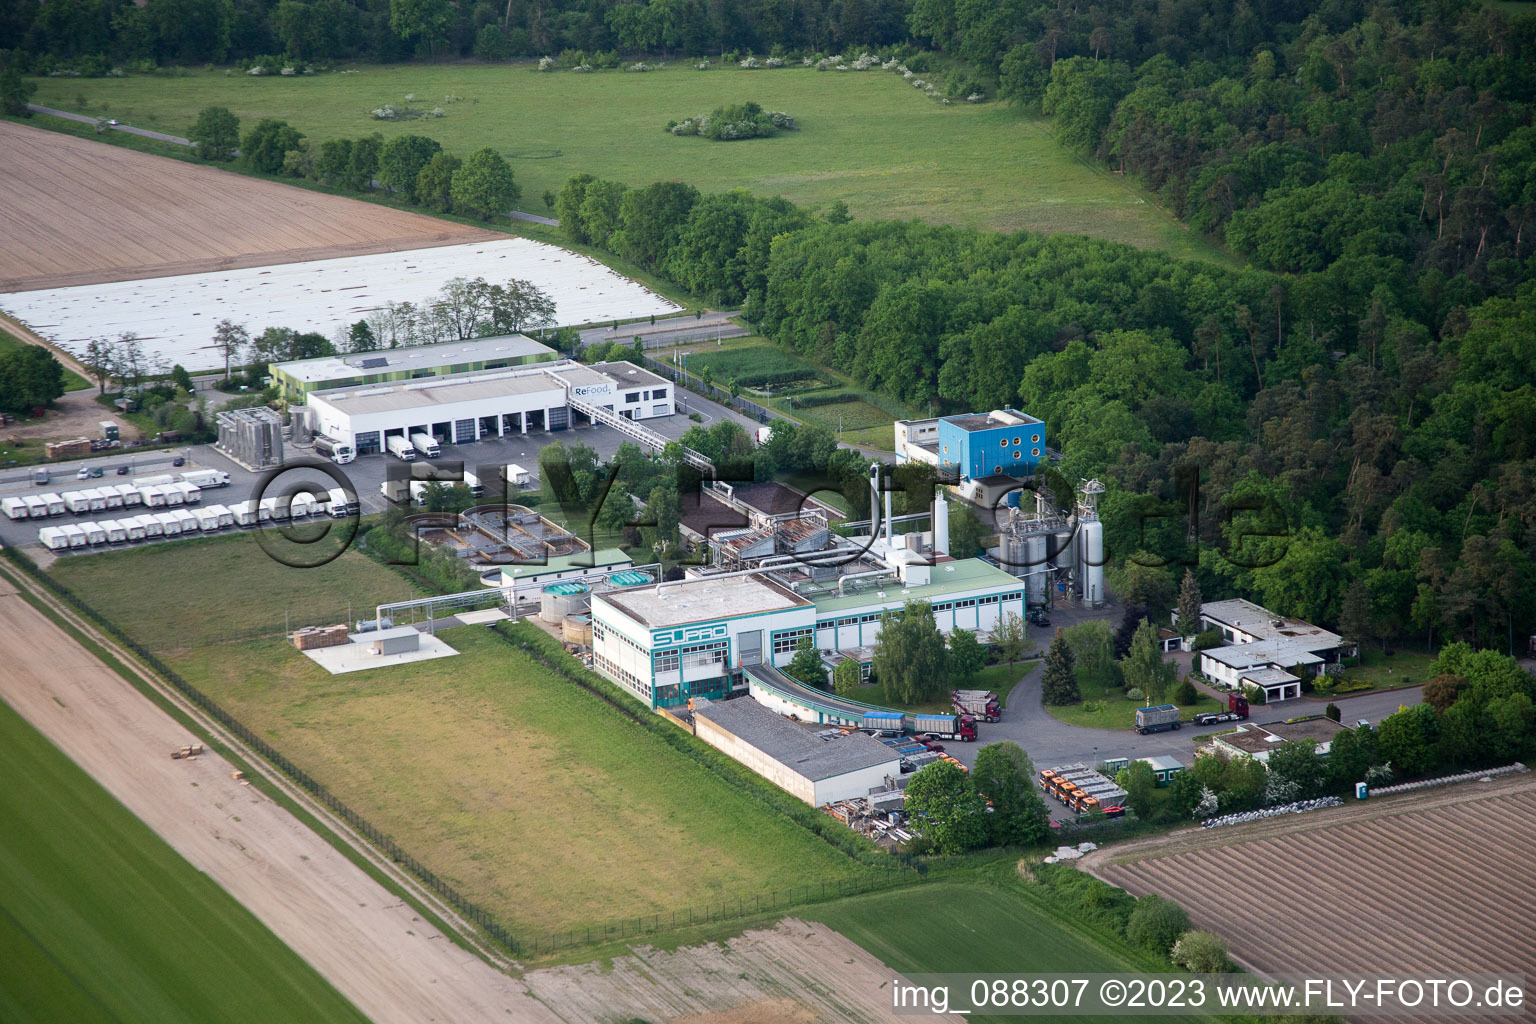 Drone recording of Hüttenfeld in the state Hesse, Germany